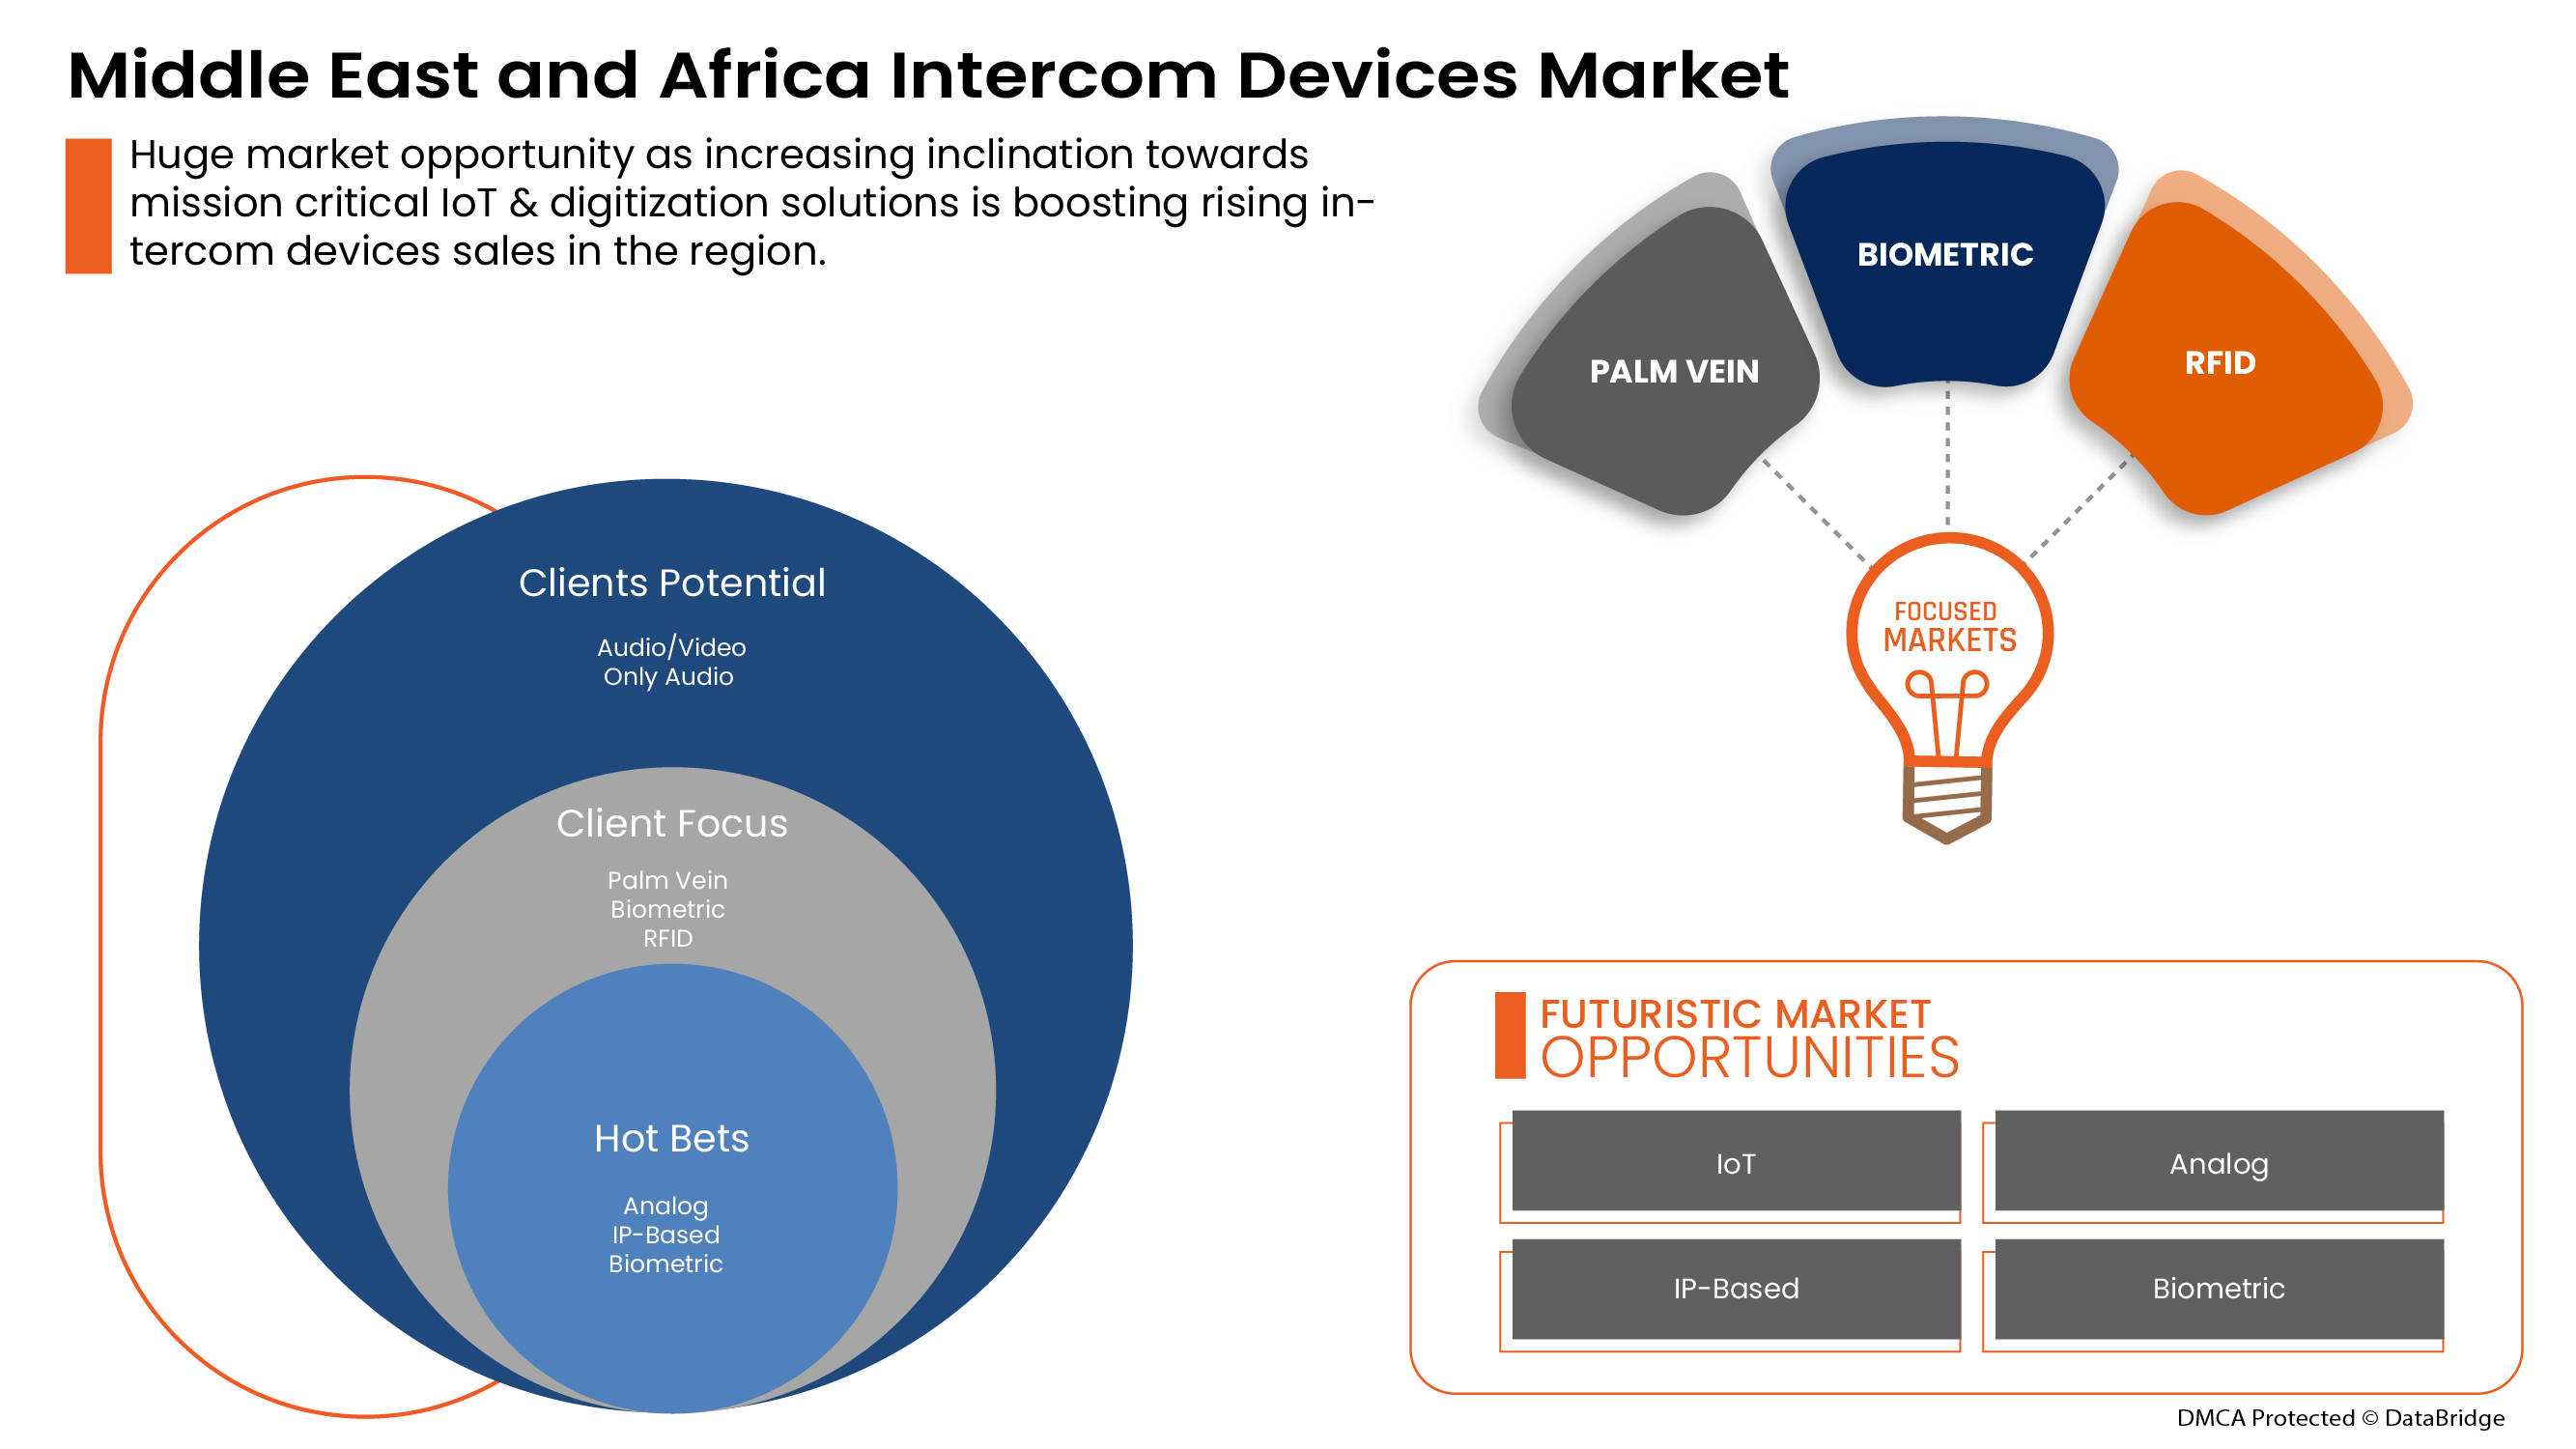 Middle East and Africa Intercom Devices Market